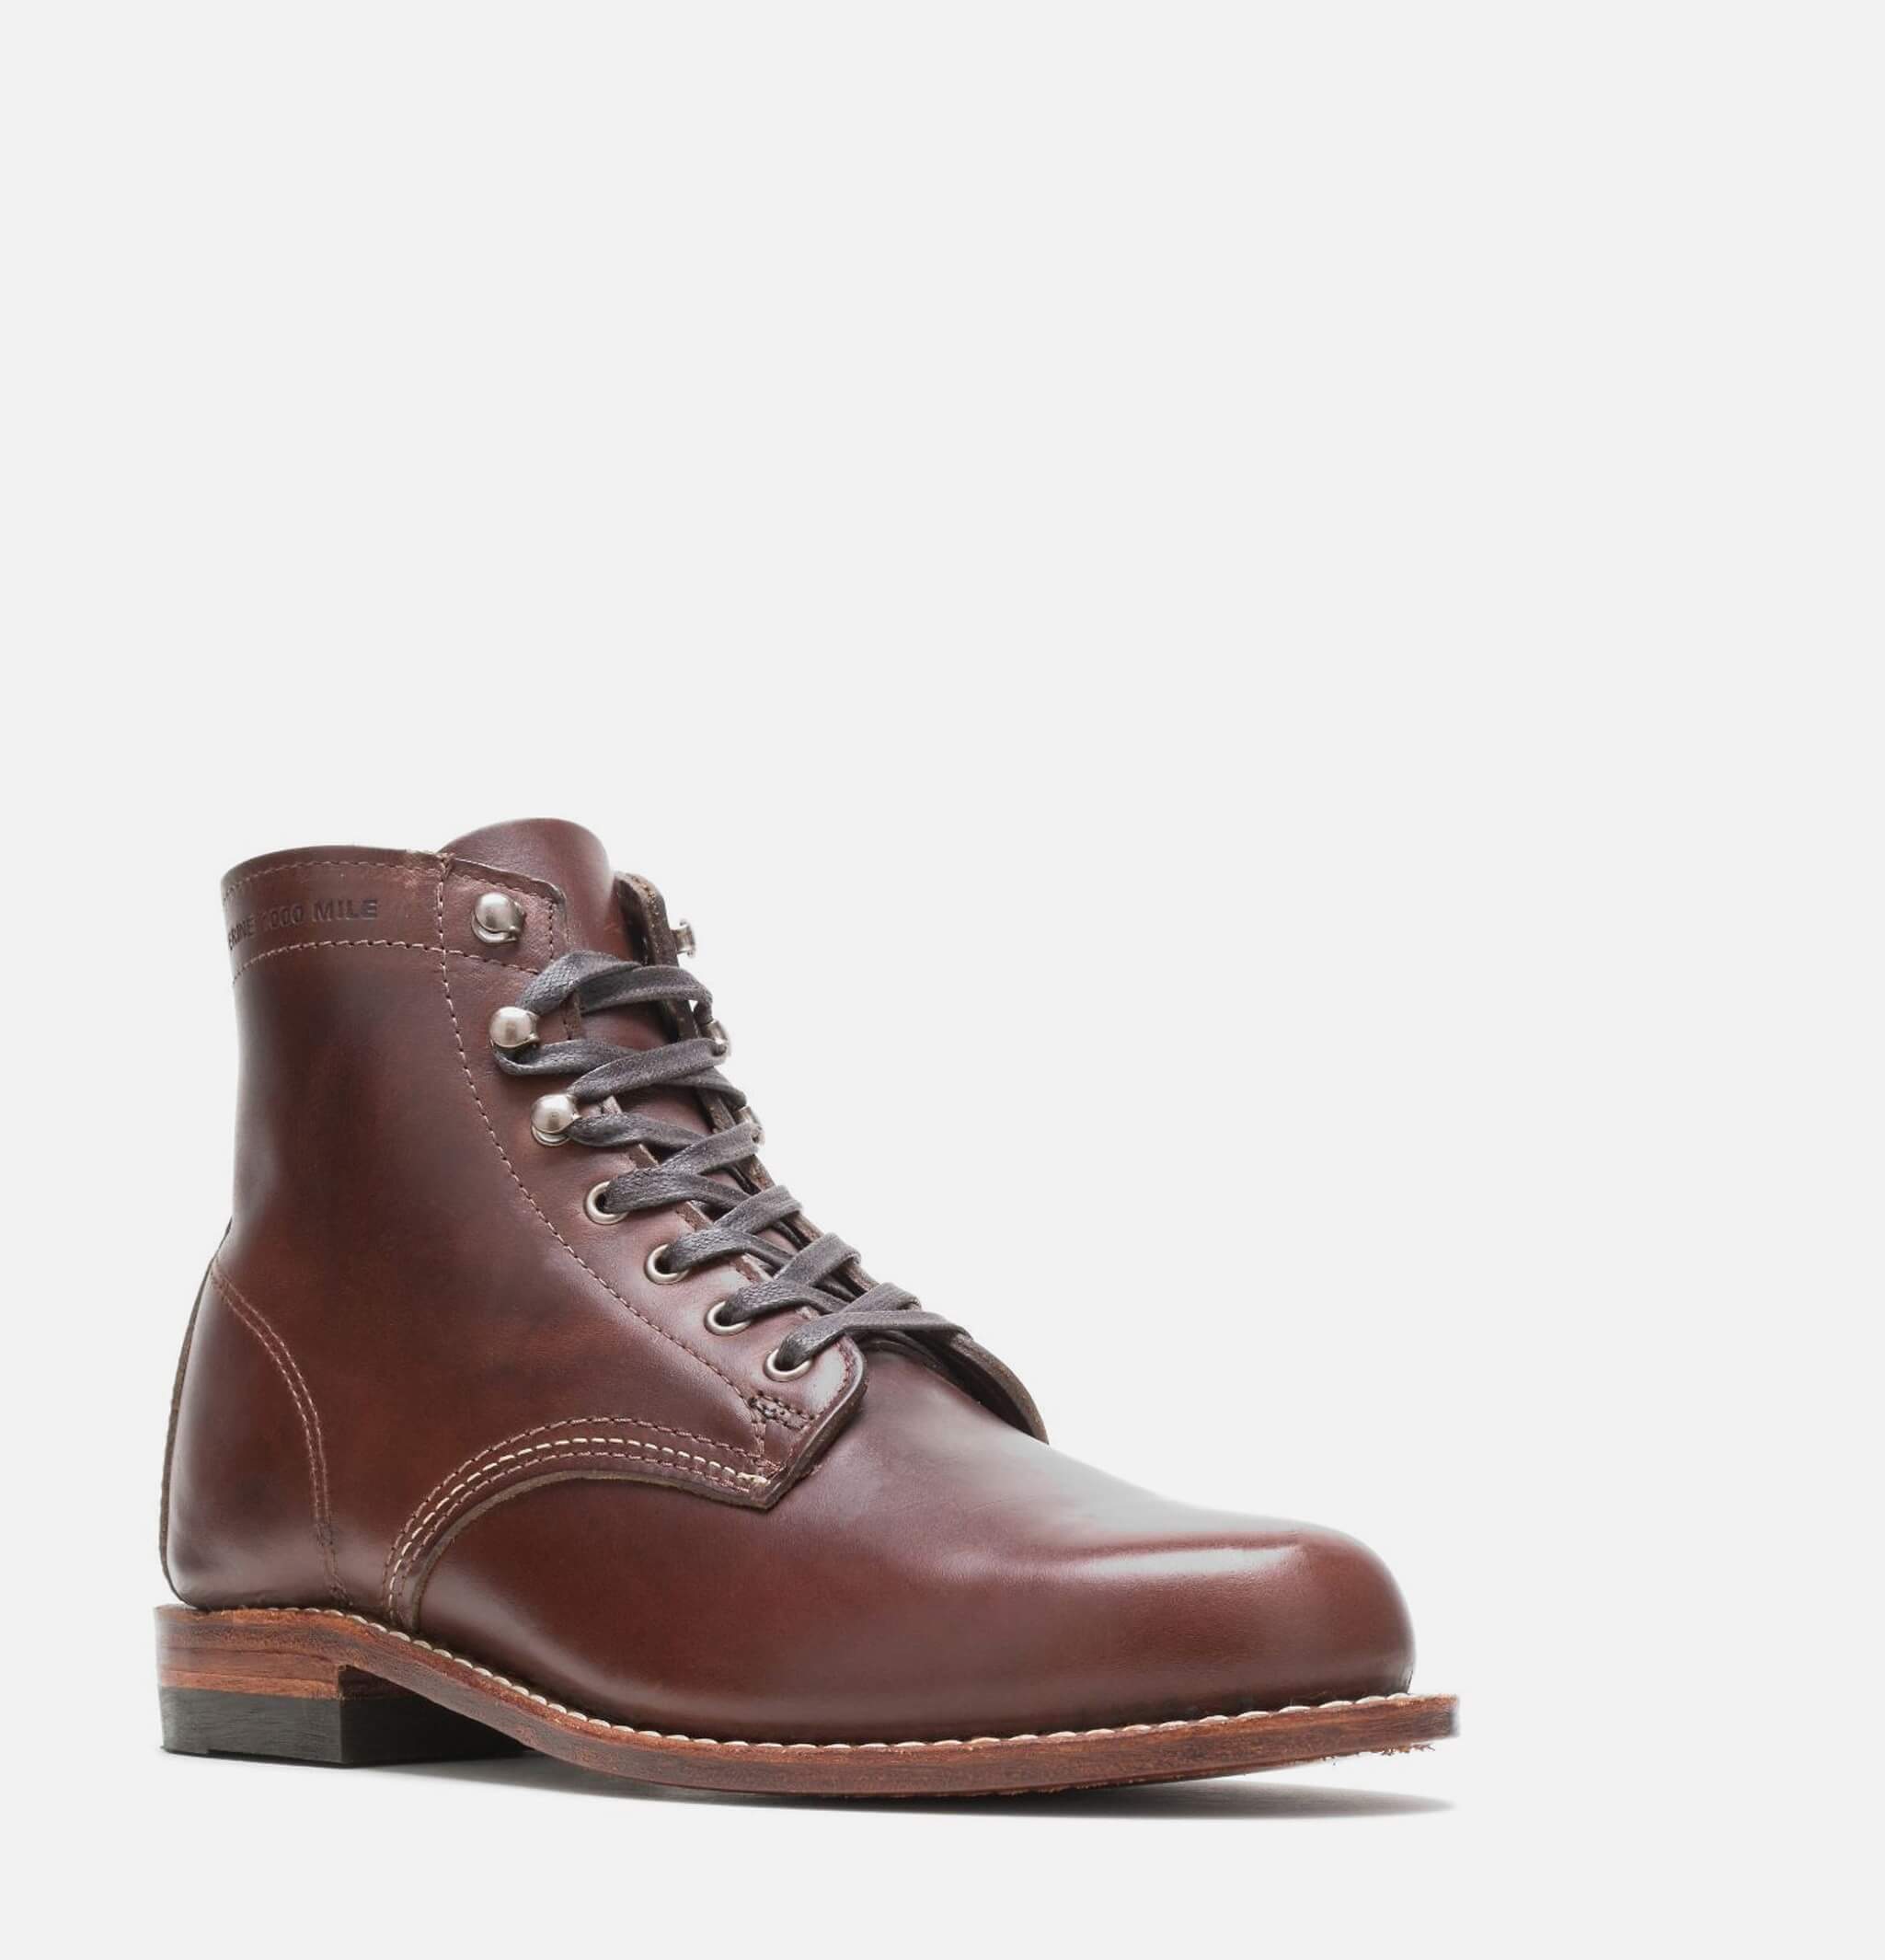 1000 Mile Boots Brown